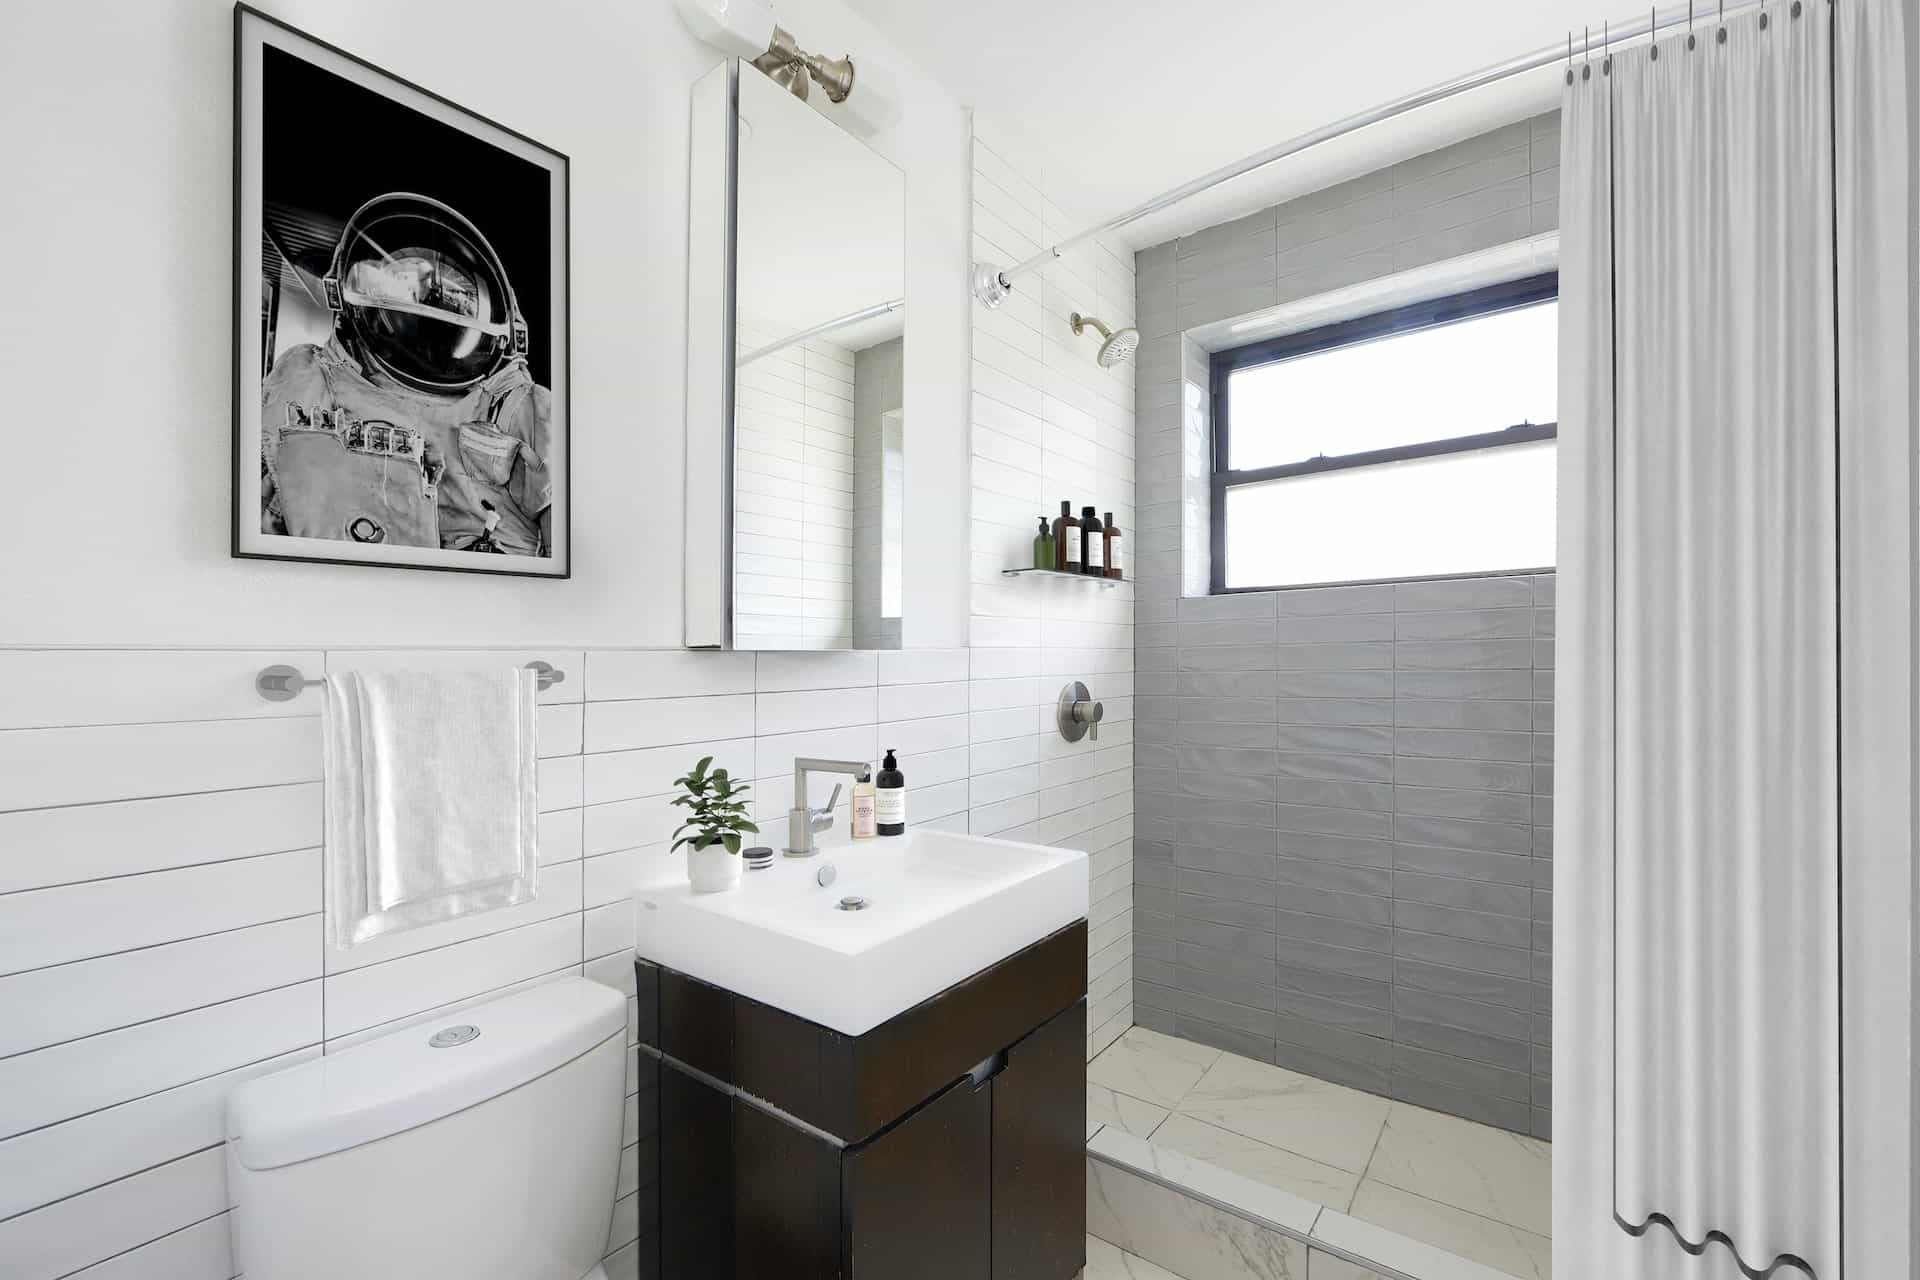 Bathroom at 401 East 50th Street apartments with tile walls, single vanity, a rectangle mirror and walk-in shower.